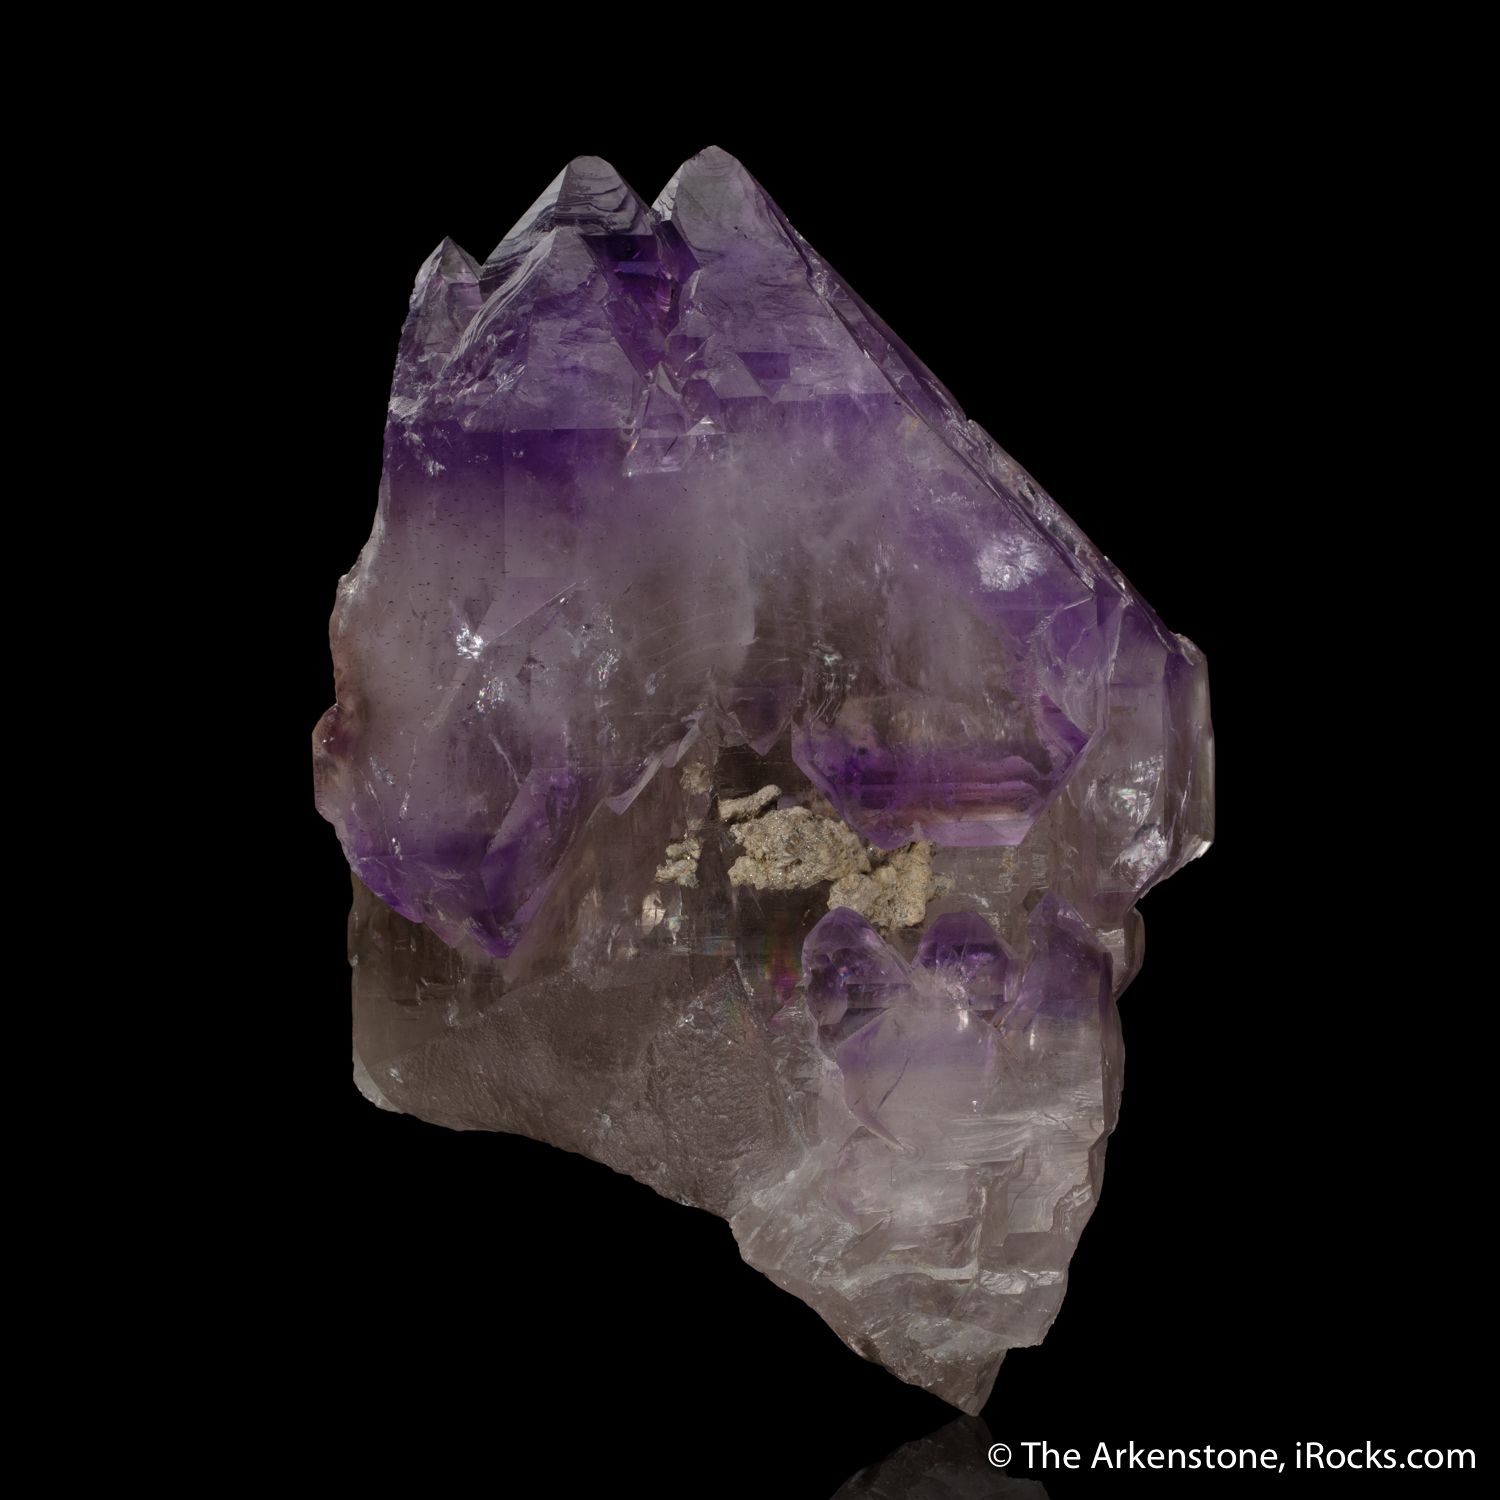 Iron out for cleaning quartz crystals #hansencreek #amethyst #scepter